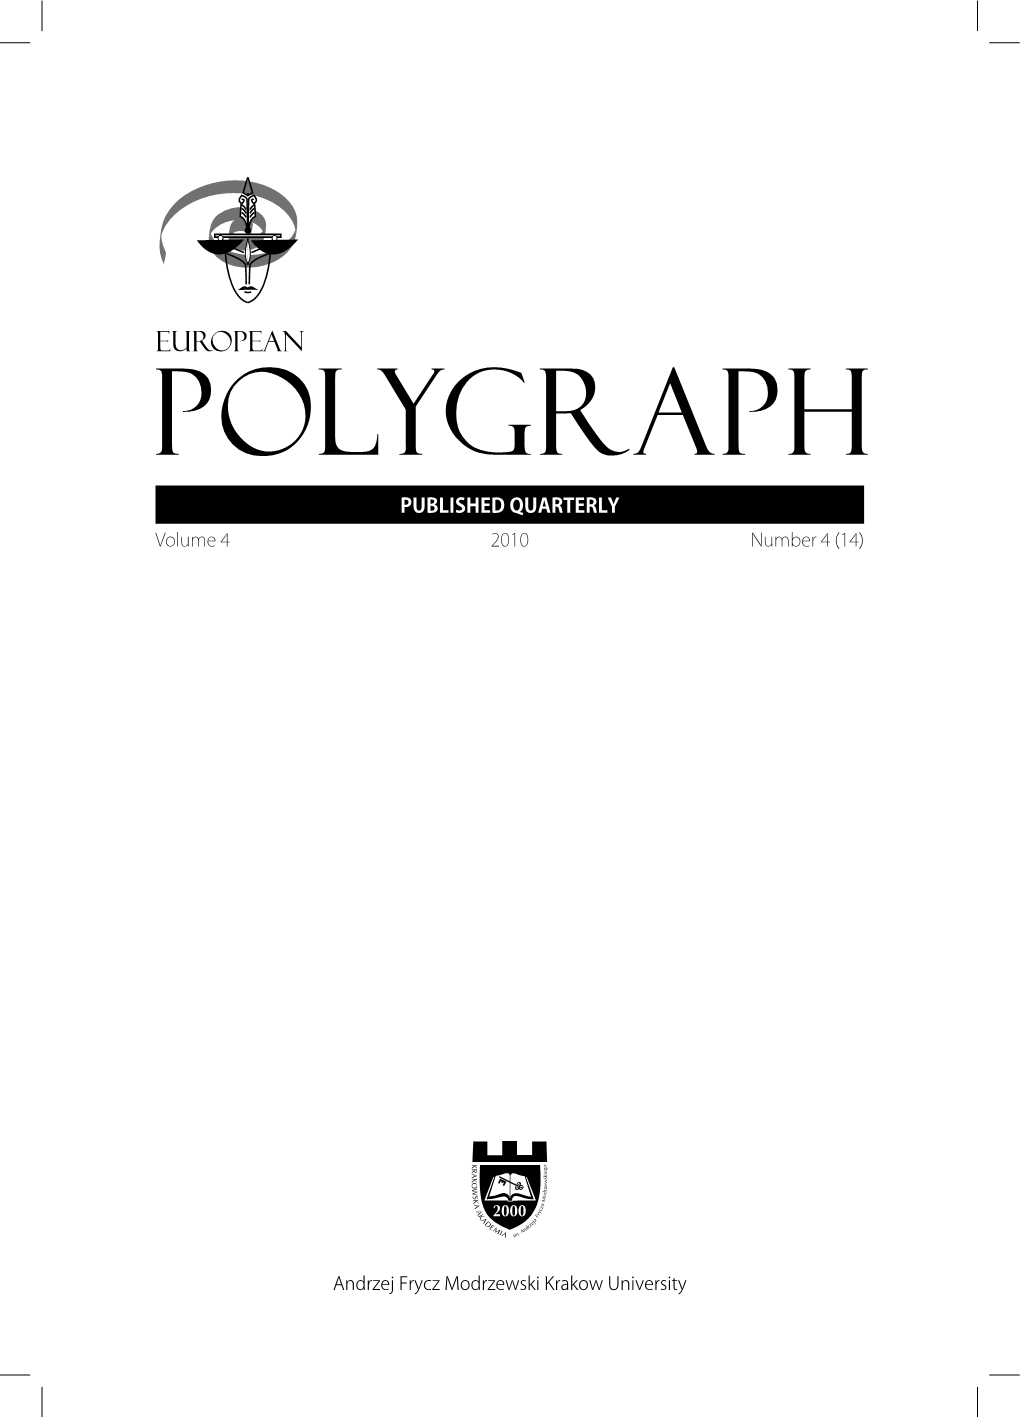 Guiding Principles and Benchmarks for The Conduct of Validity Studies of Psychophysiological Veracity Examinations Using the Polygraph